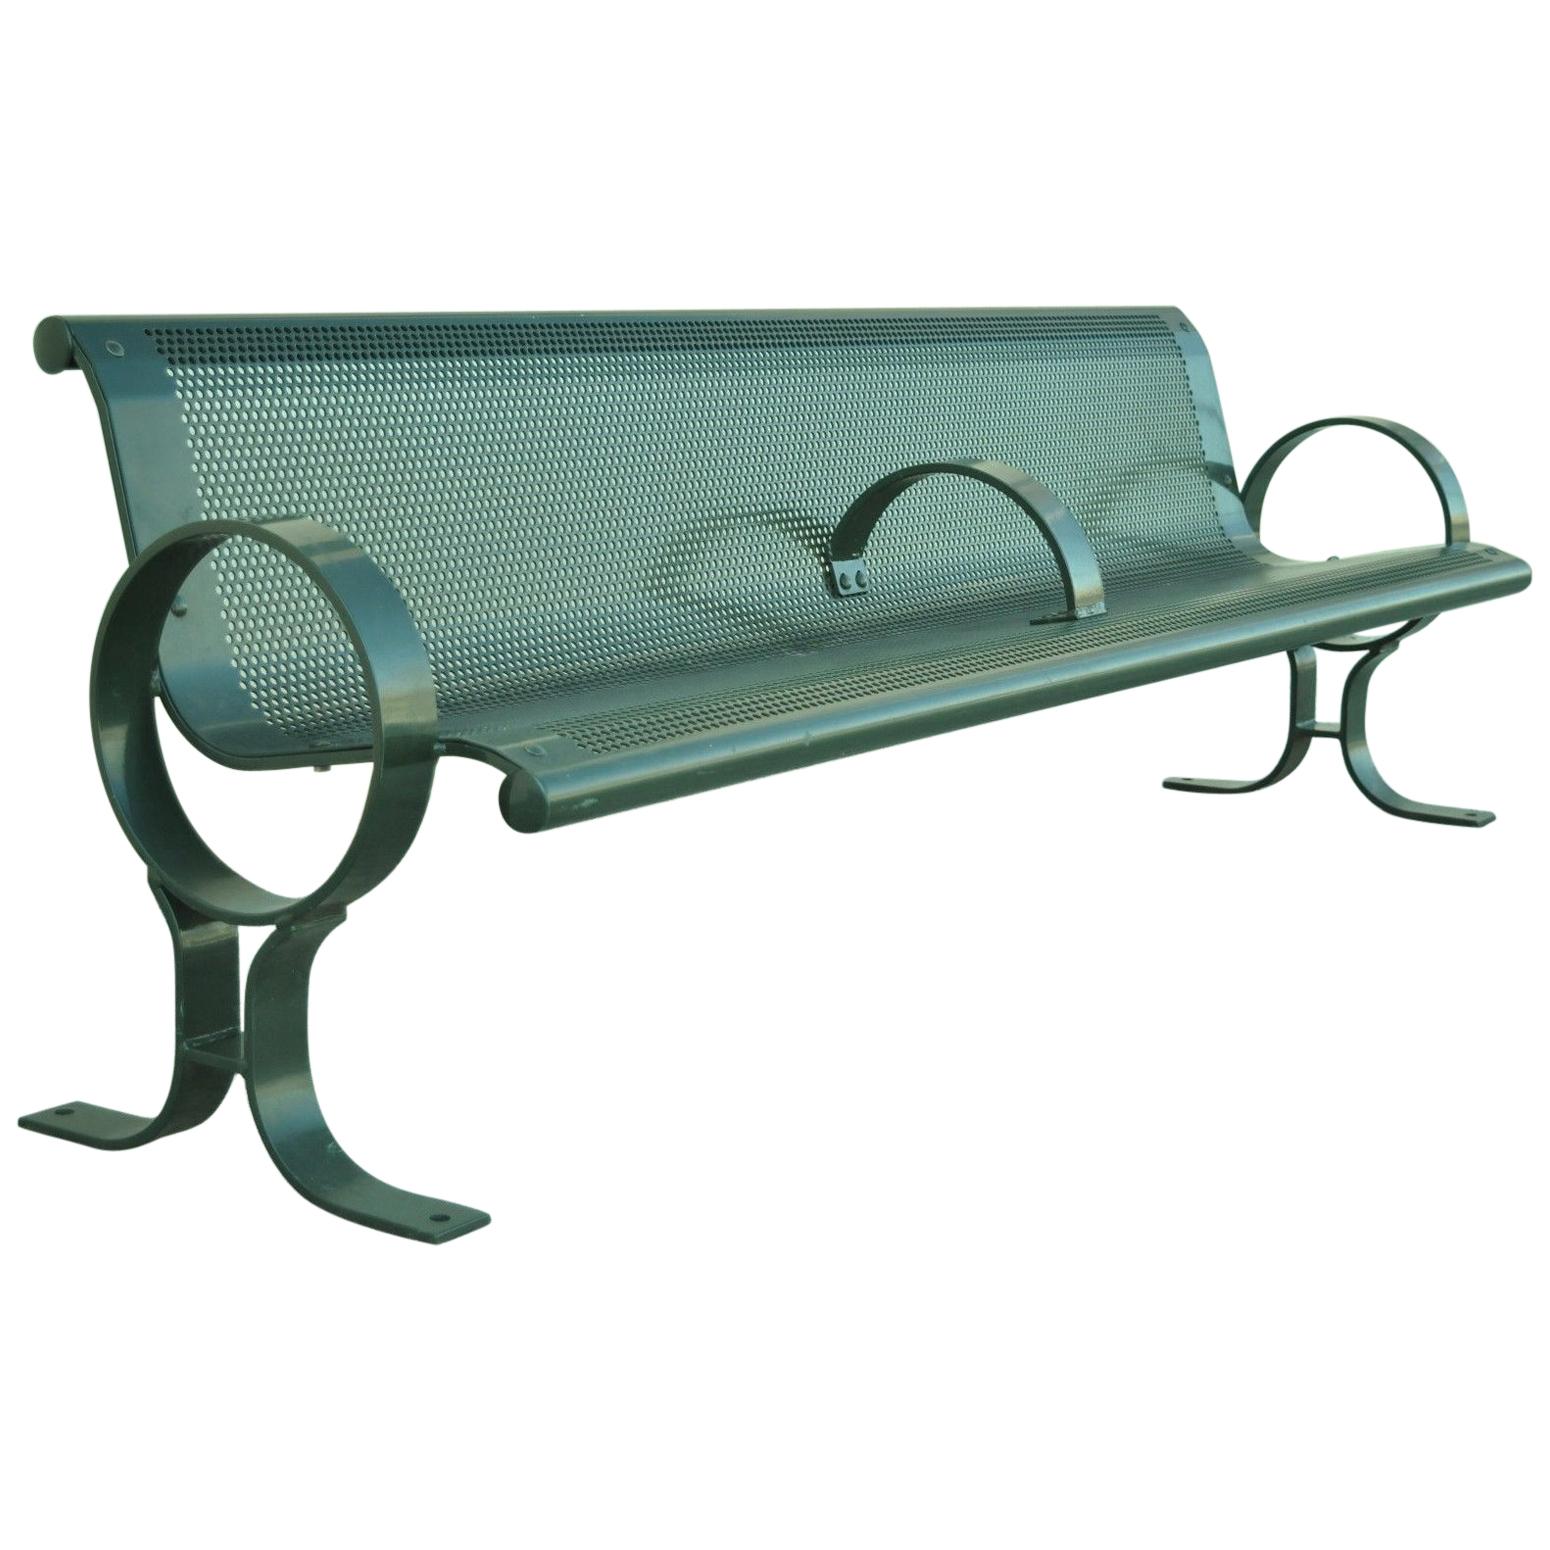 Dumor 59 Series Steel Green Park Outdoor Bench Perforated Seat 101" 8 Feet (a)